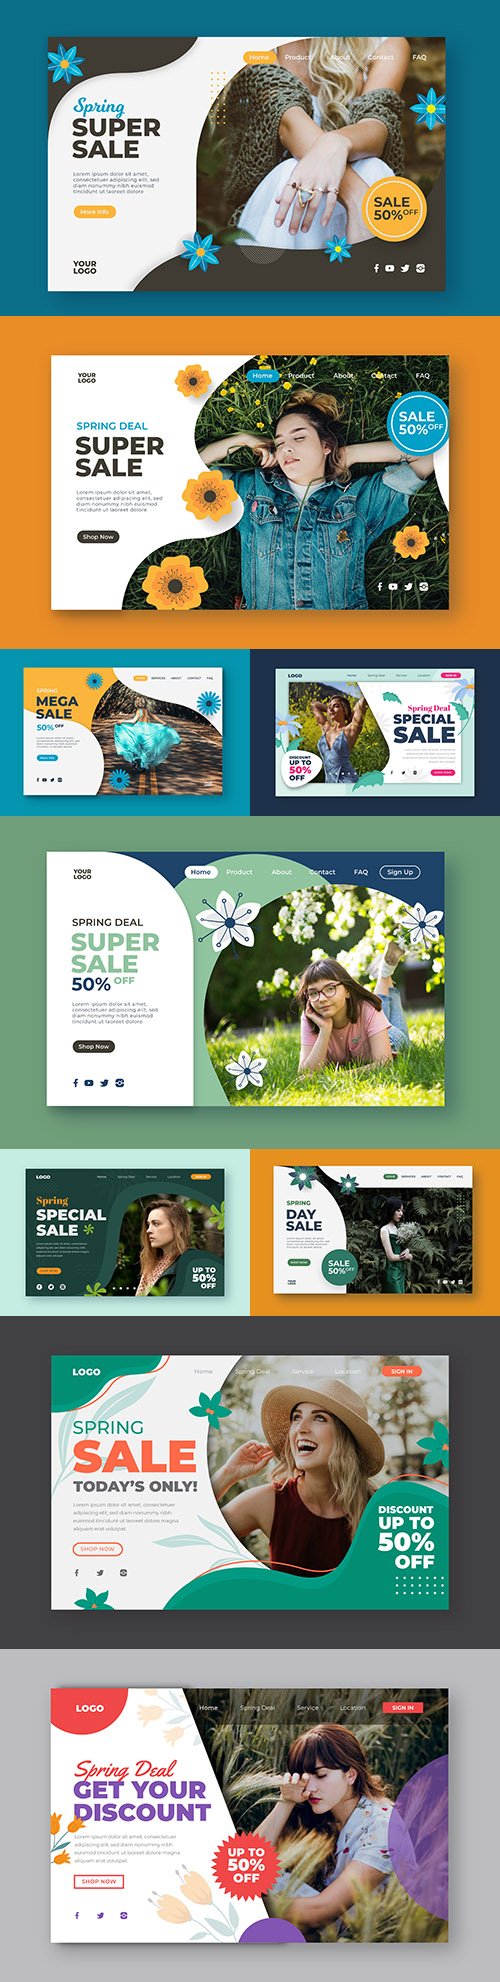 Super sale and discount design landing page